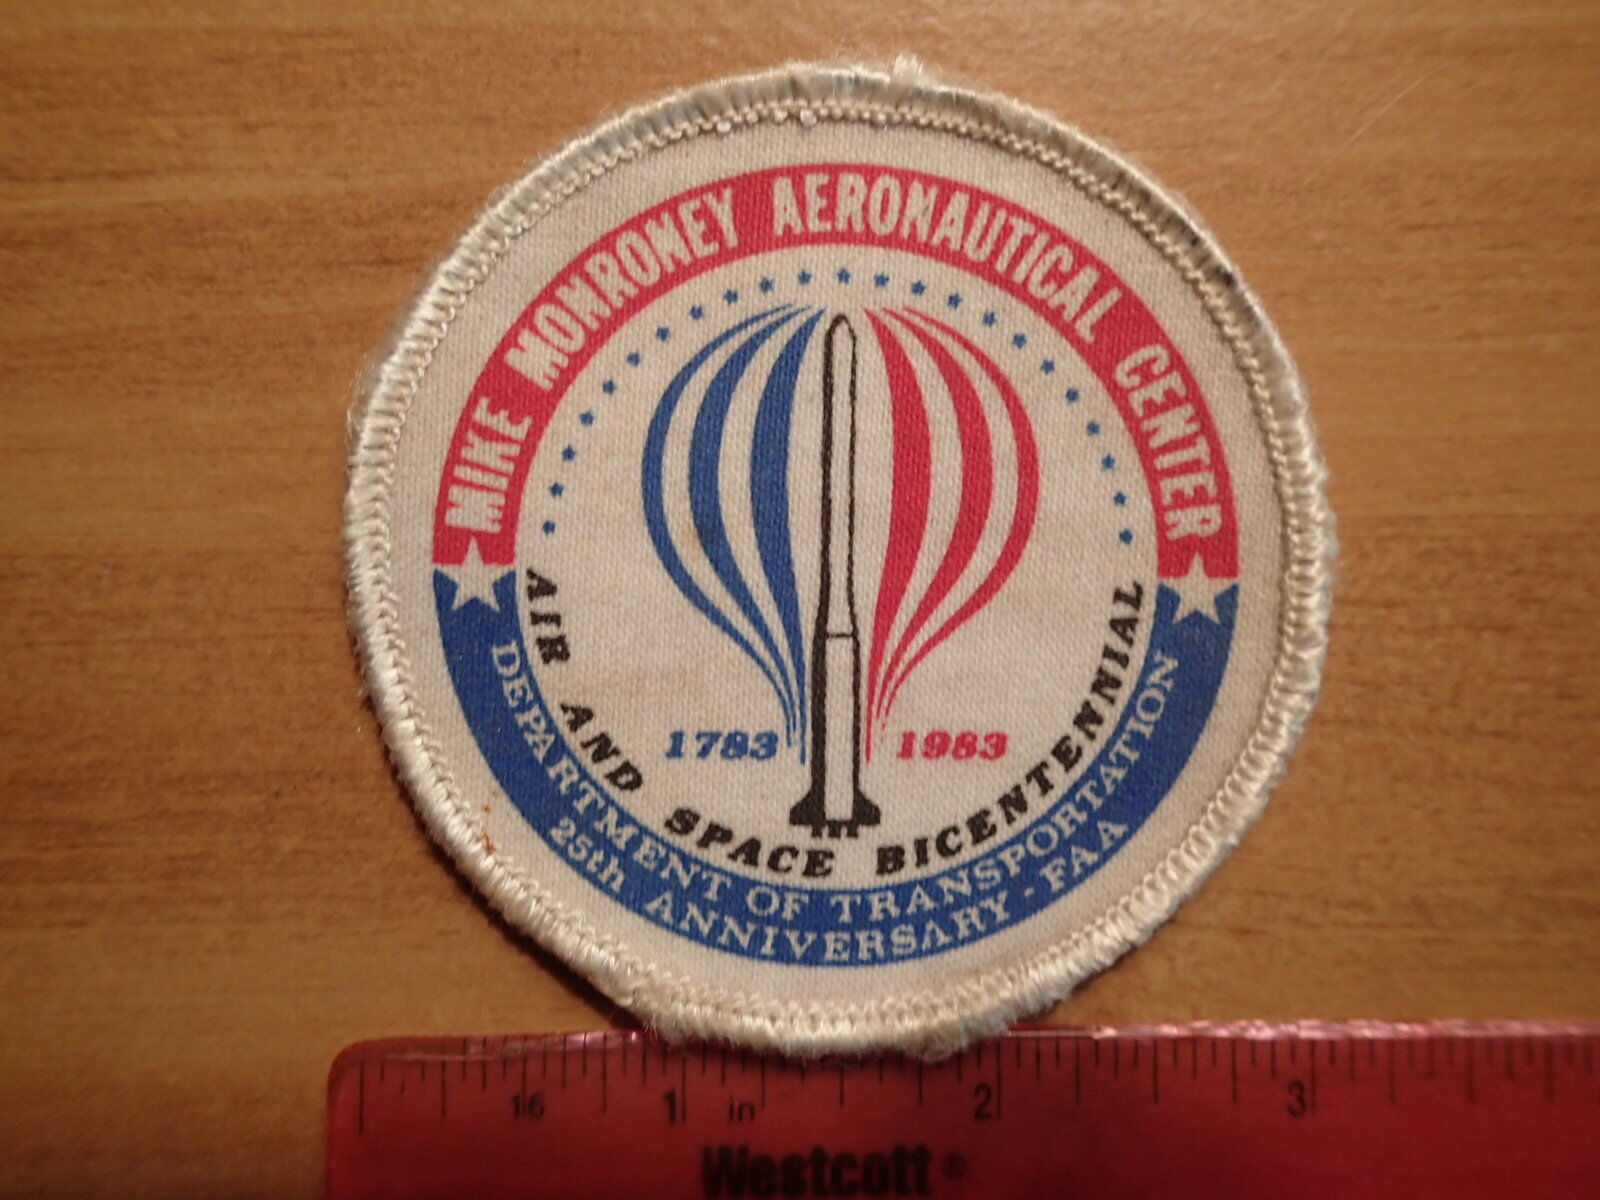 VINTAGE-Mike Monroney Aeronautical Center Patch-AIR & SPACE BICENTENNIAL-Used